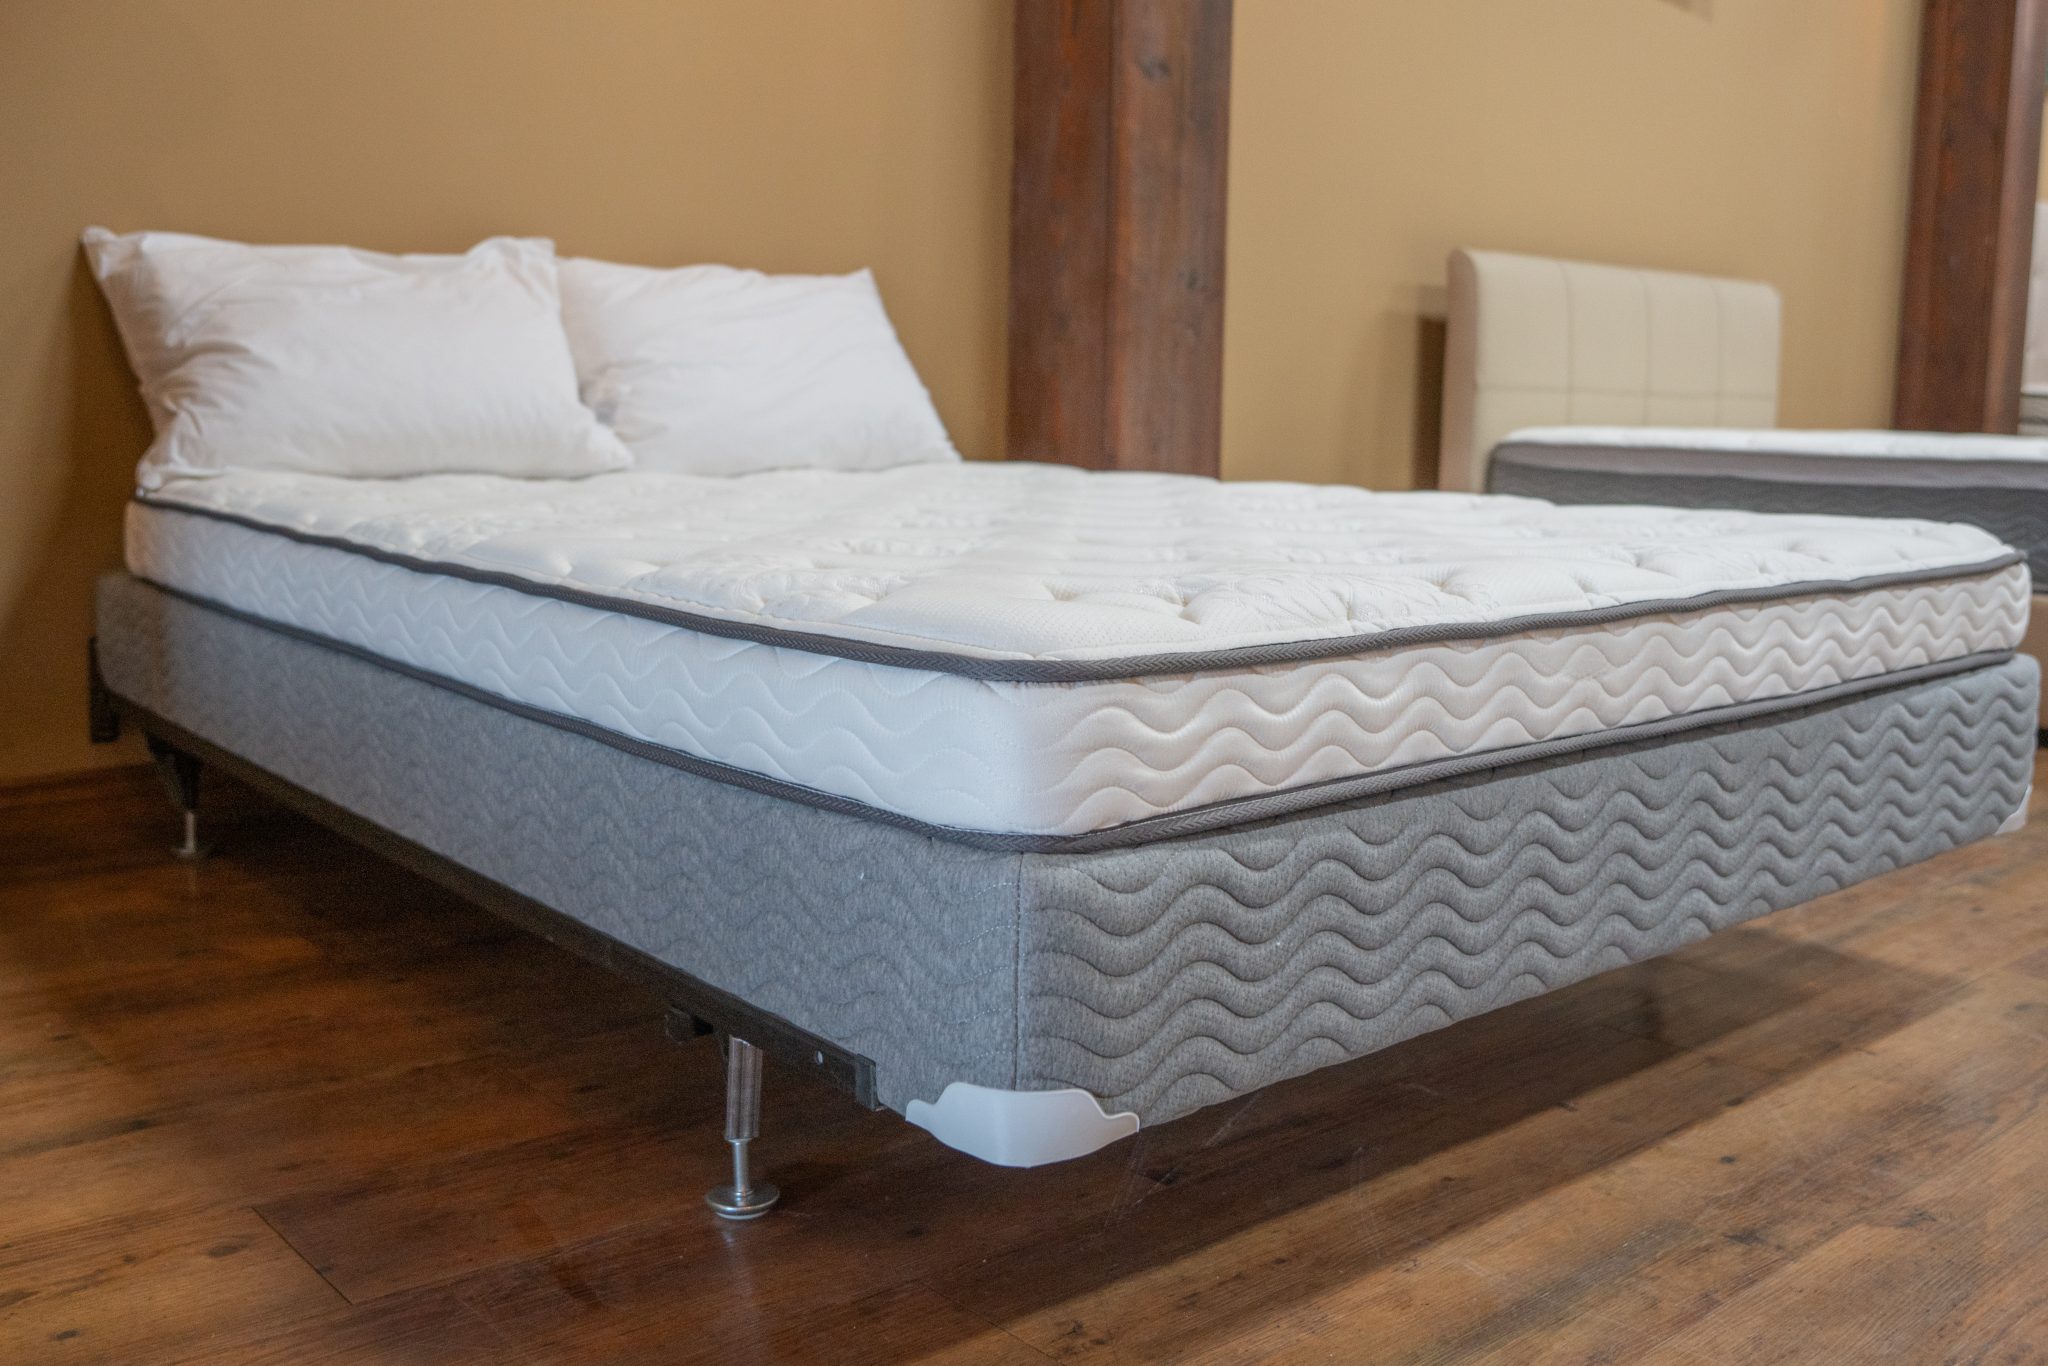 replacement mattress for full size hide a bed